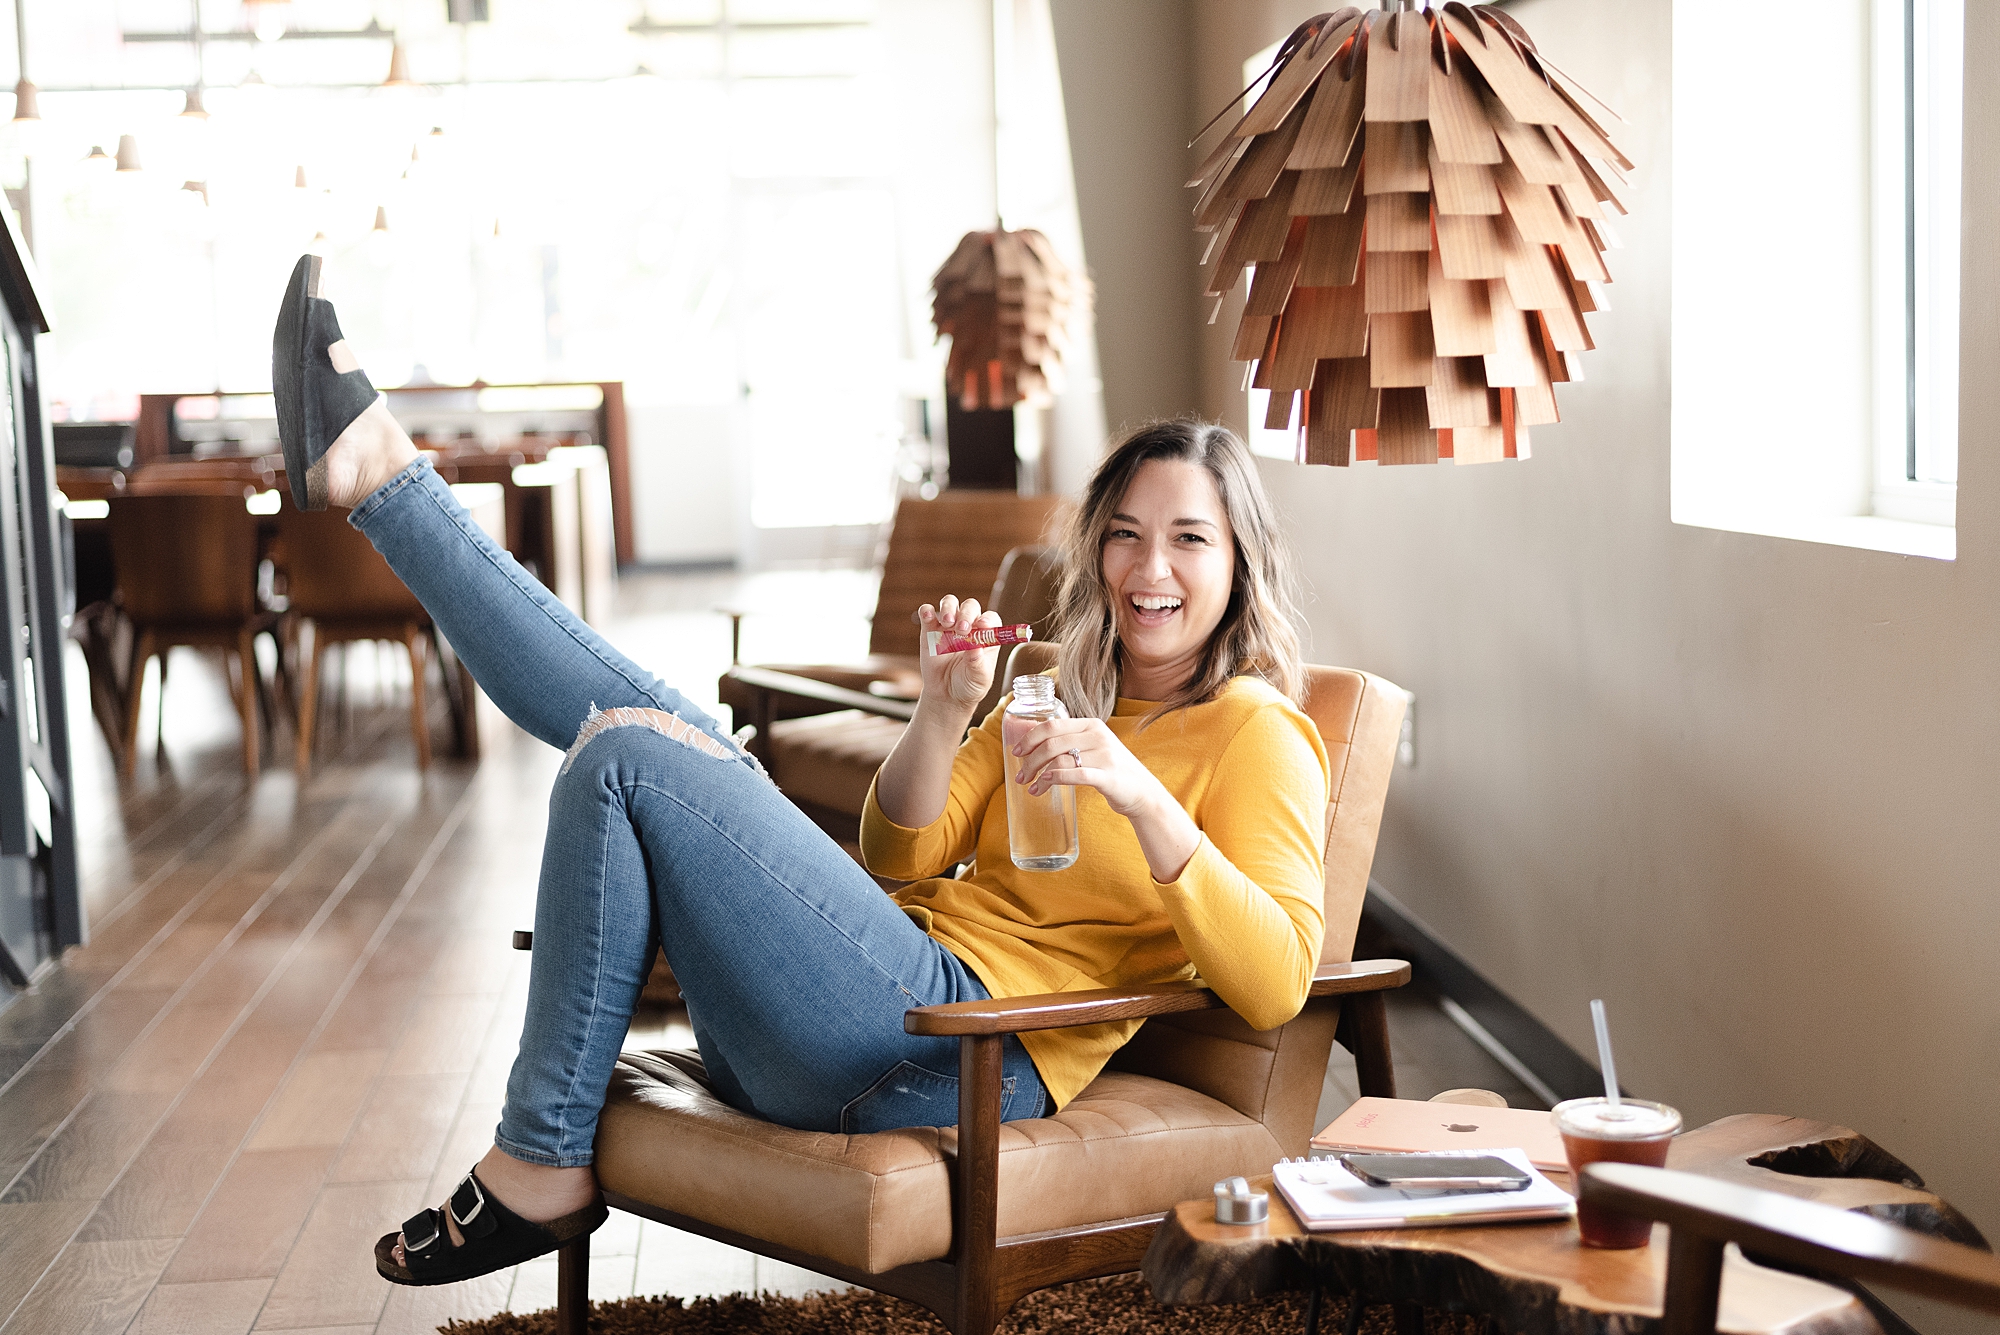 Joyful Woman Wearing a Yellow Shirt is sitting in a coffeeshop and is pouring herself a plexus pink drink and laughing